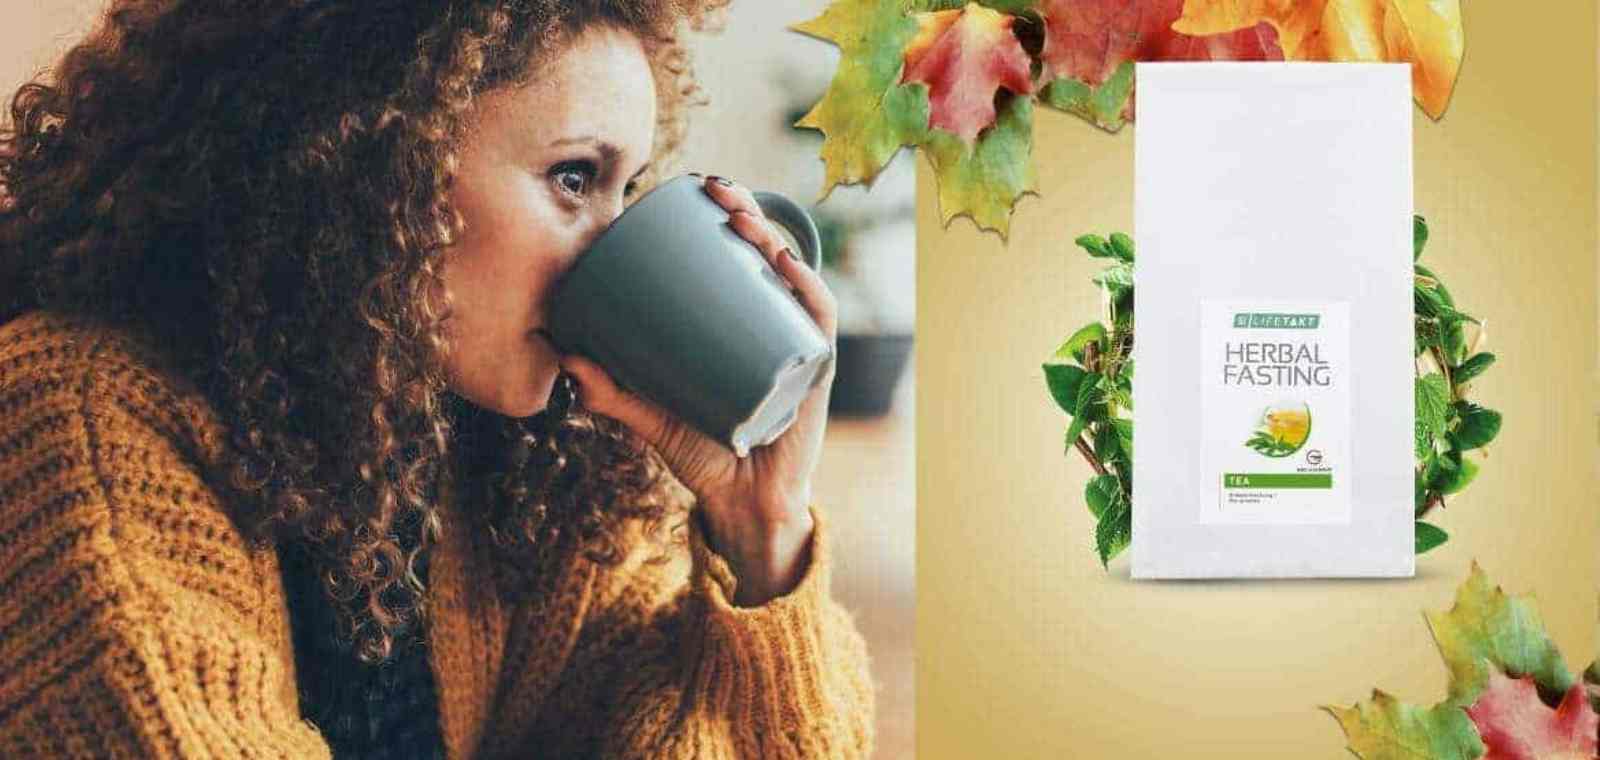 Best one Herbal fasting Tea for weight loss